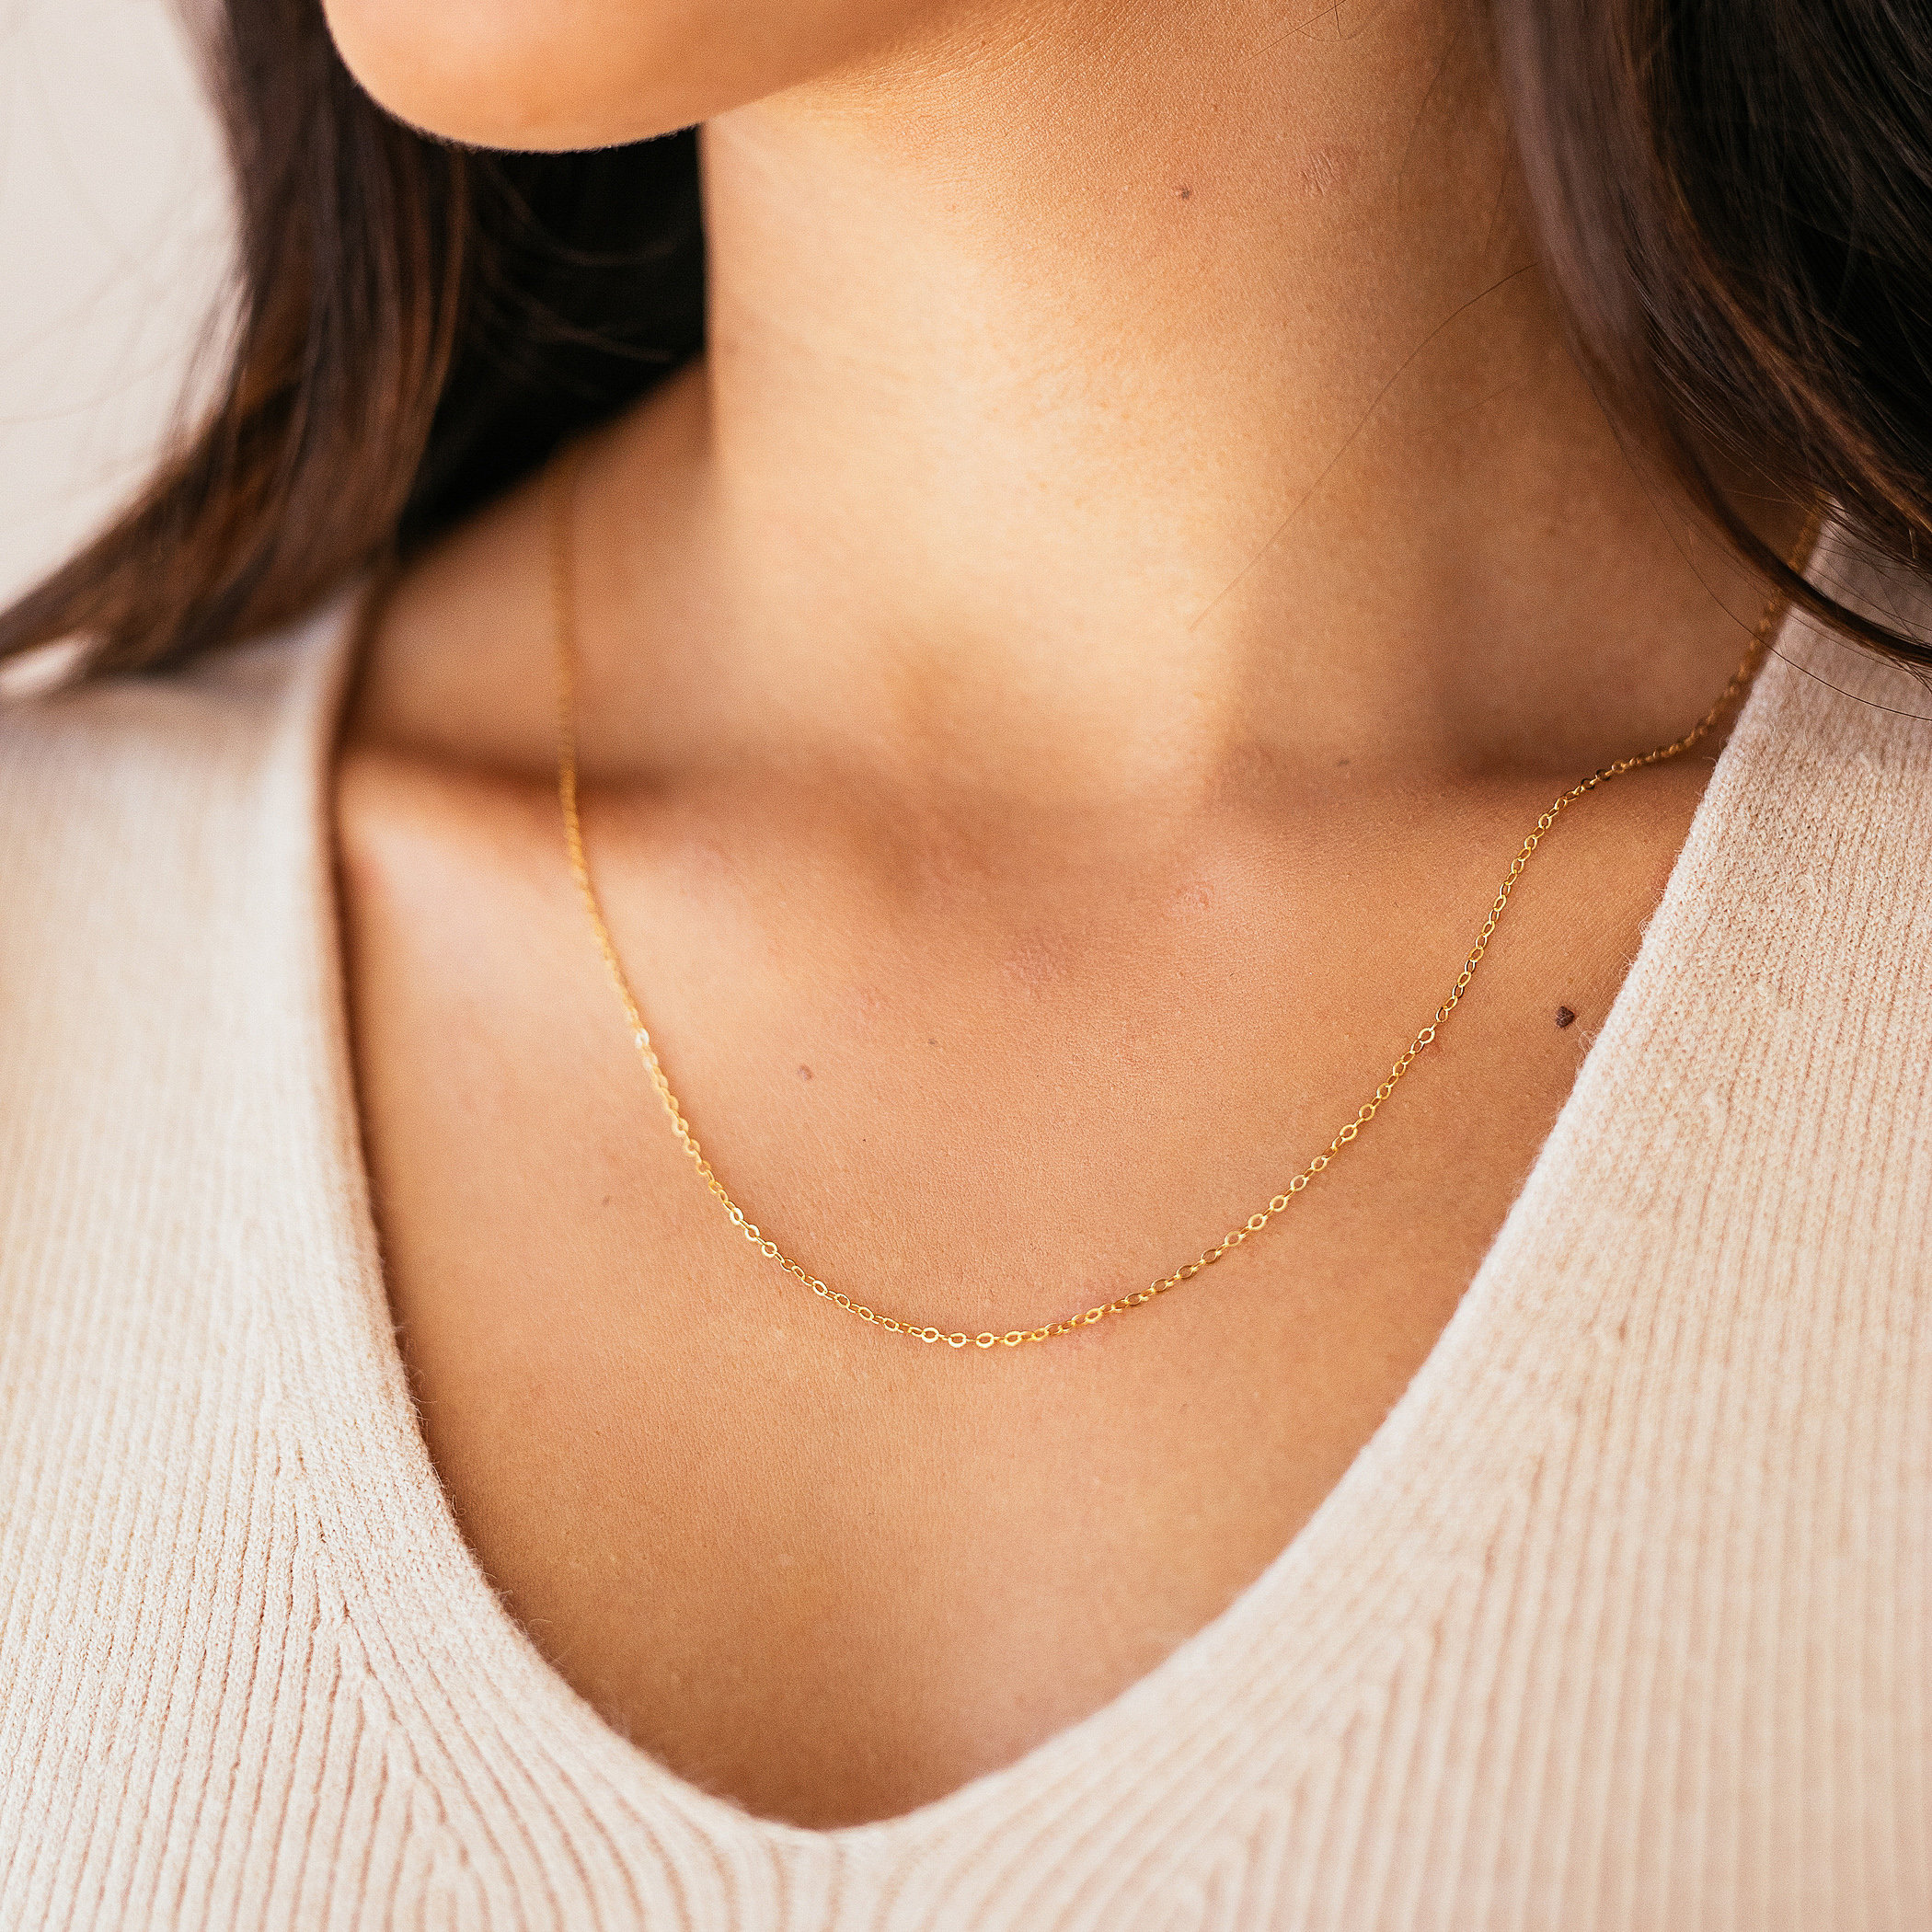 Dainty Layering Necklace, Thin Gold Chain, Sterling Silver, Rose Gold Fill,  14k Gold Fill Chain, Choker Chain, Delicate Thin Chain Necklace 